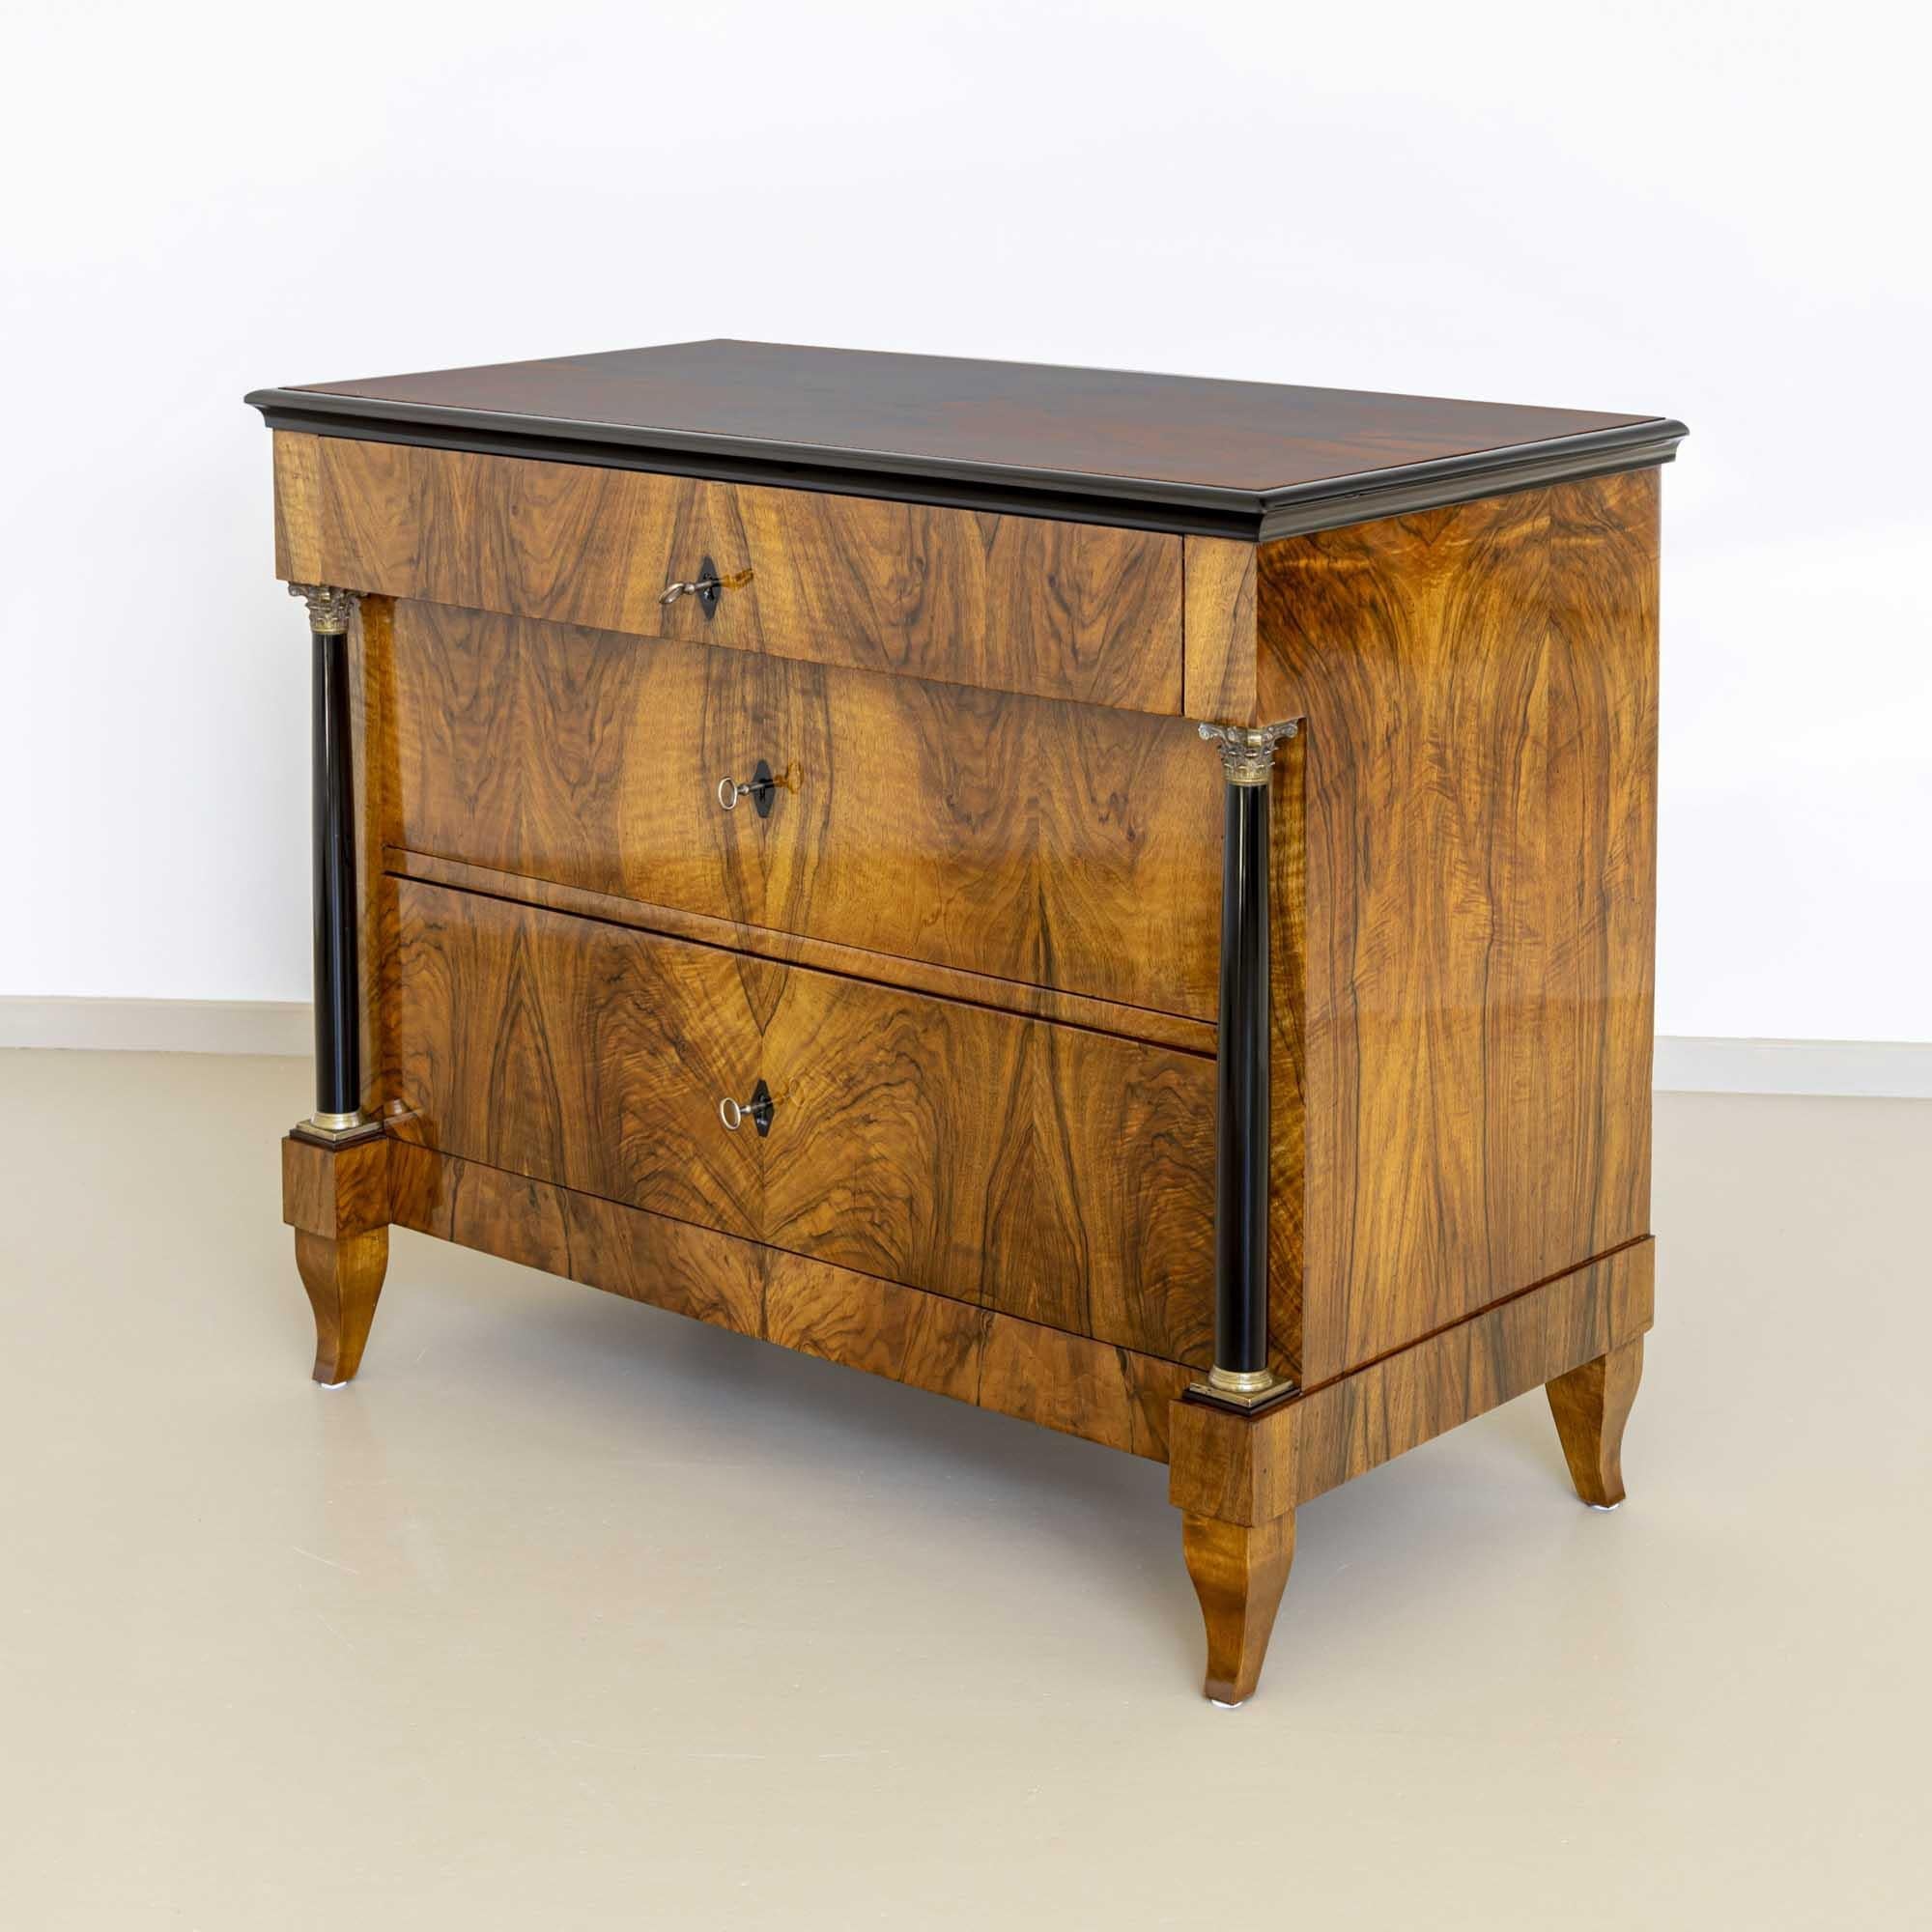 Biedermeier Chest of Drawers, South Germany around 1820 In Good Condition For Sale In Greding, DE